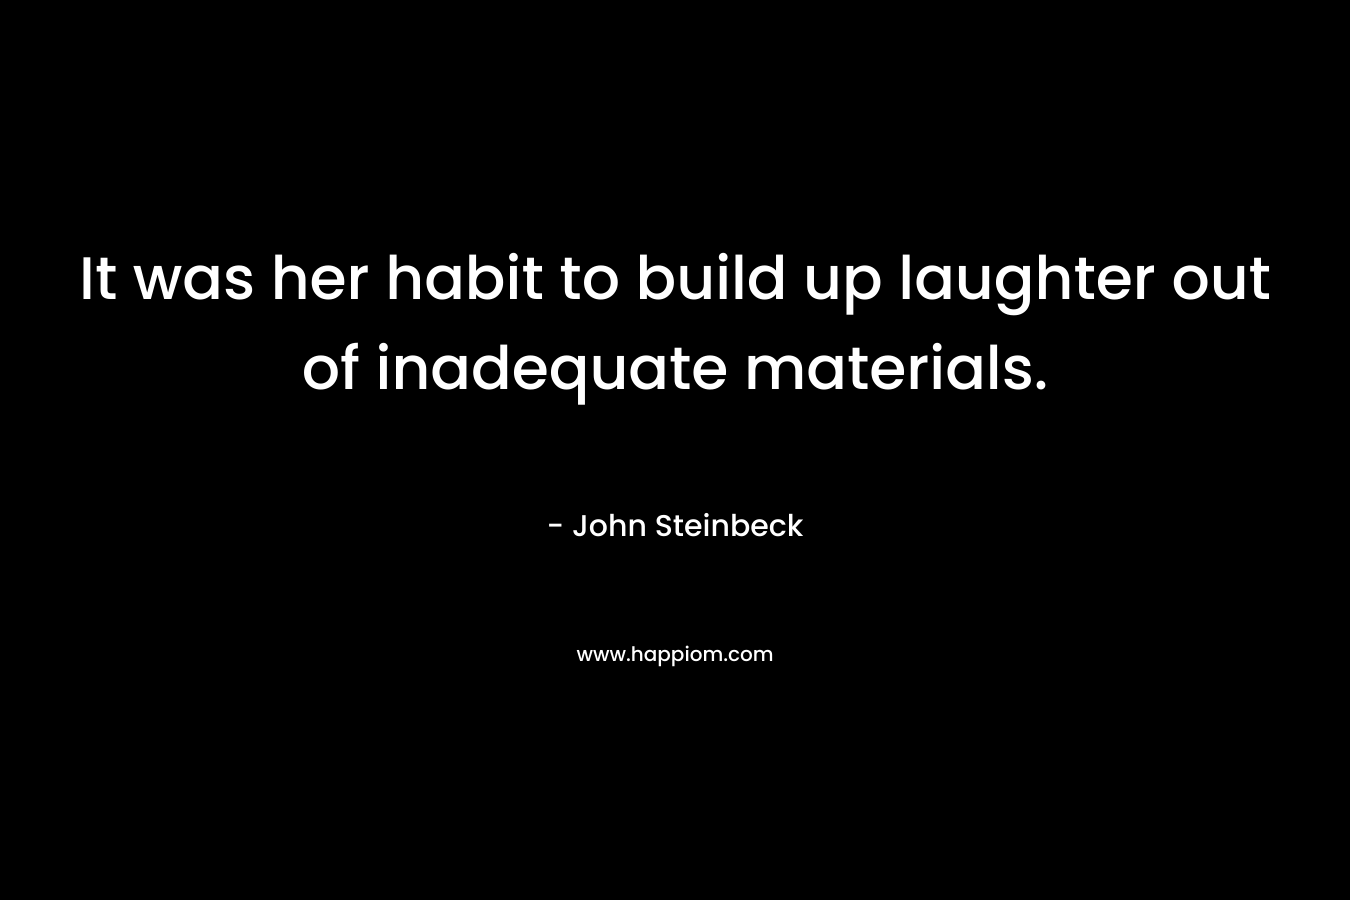 It was her habit to build up laughter out of inadequate materials. – John Steinbeck